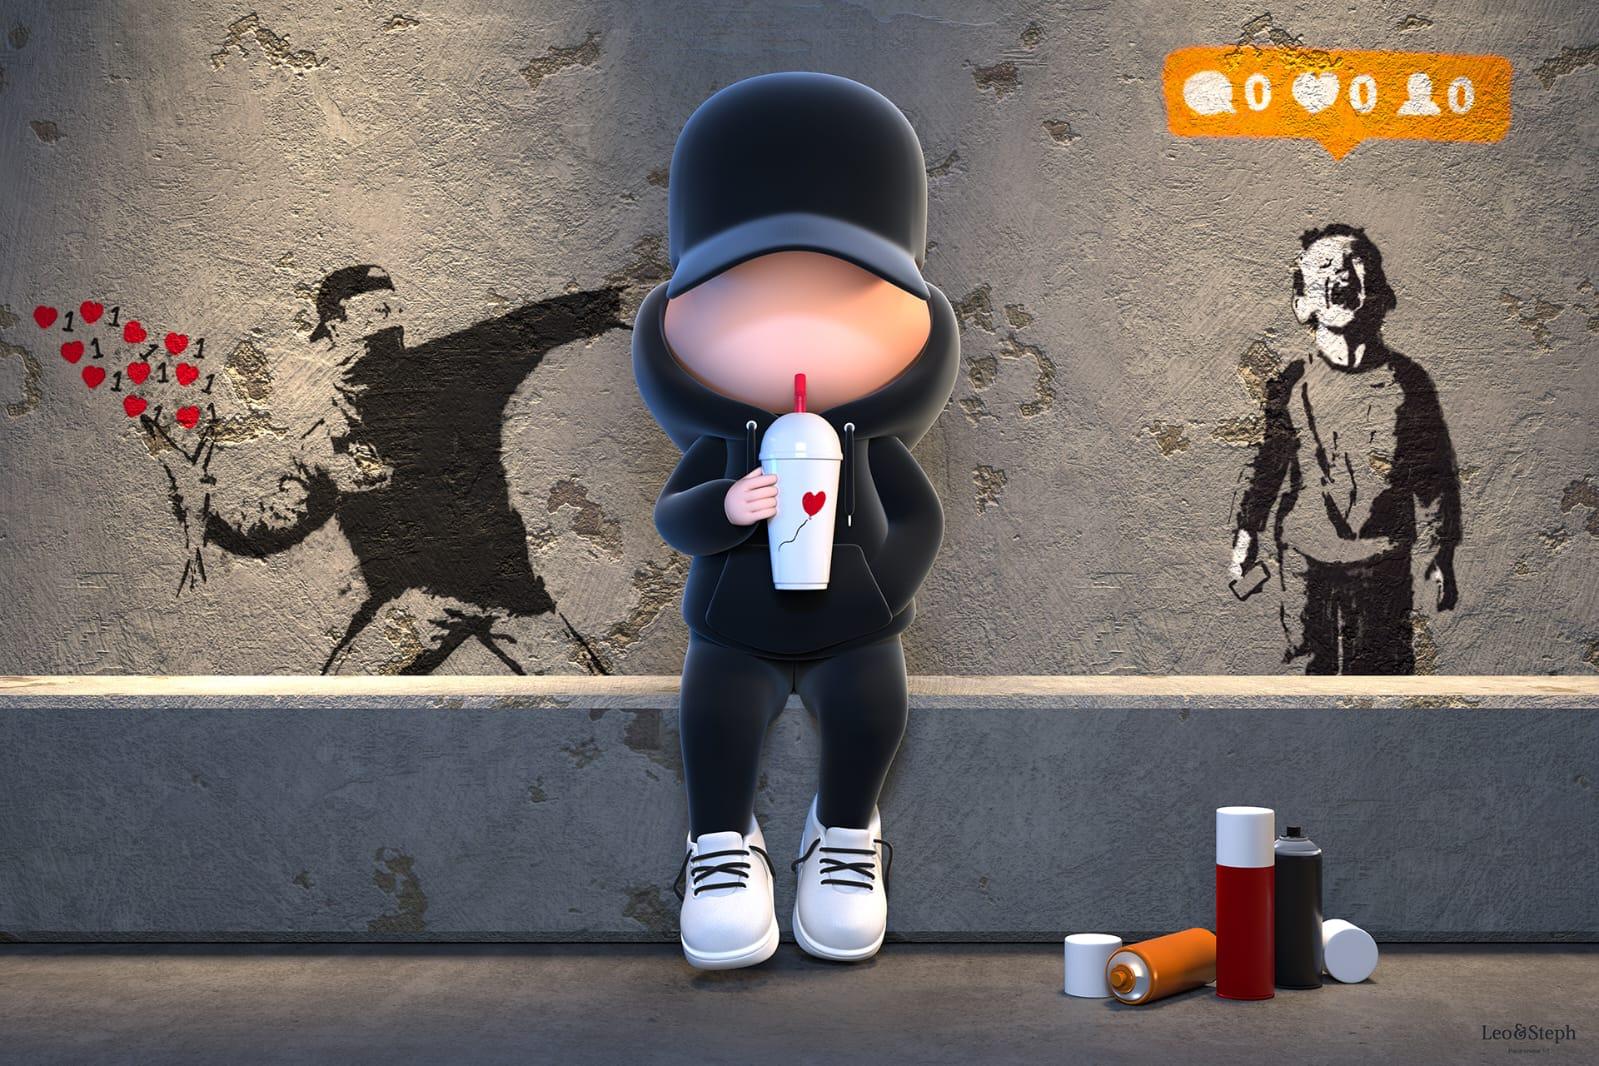 Kidcup Banksy 2 - Mixed Media Art by Leo et Steph